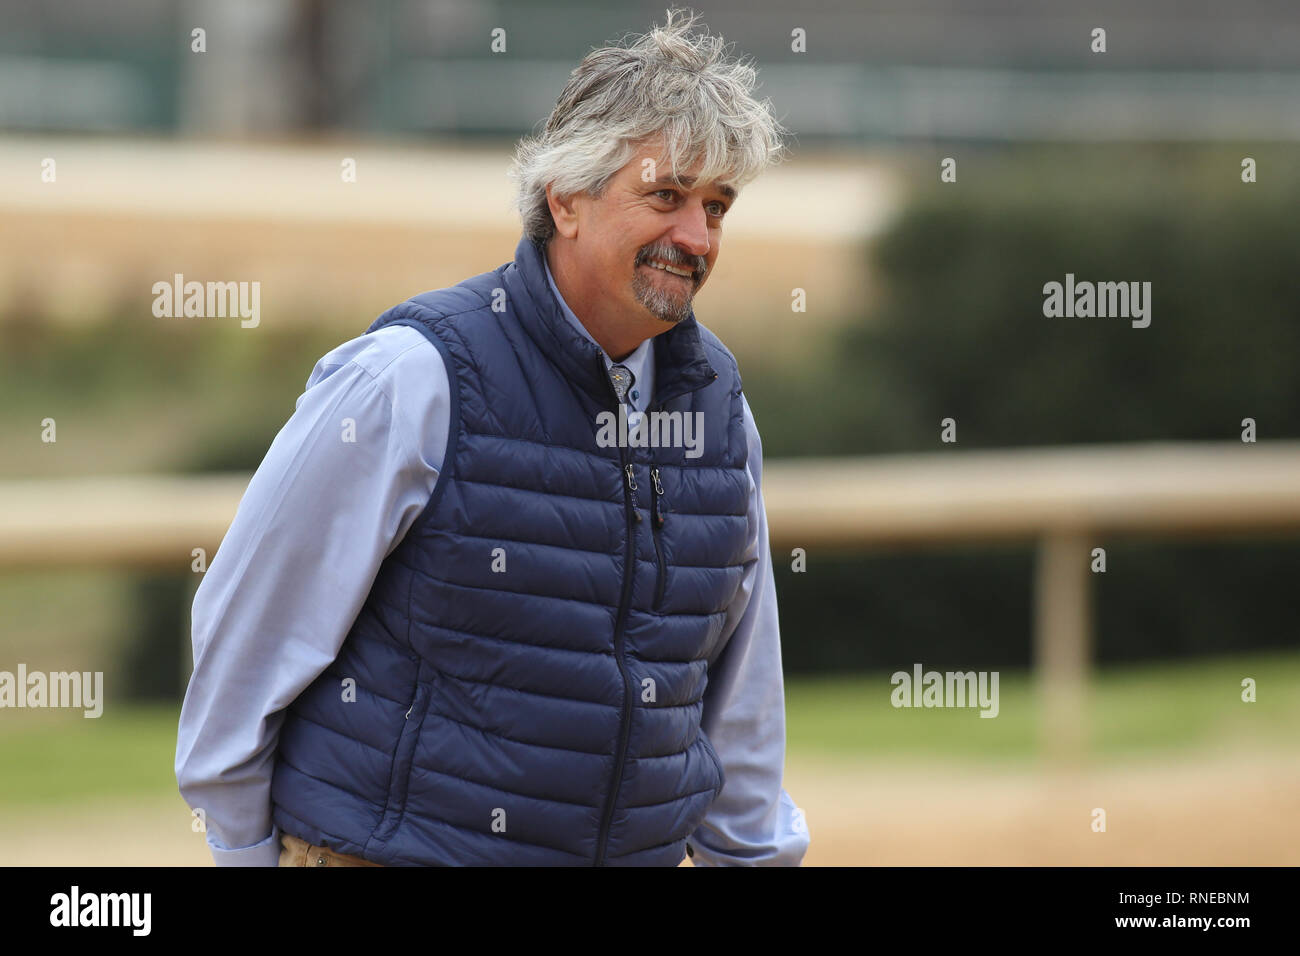 Hot Spring, AR, USA. 18th Feb, 2019. Feburary 18, 2019: Trainer Steve Asmussen after winning the Bayakoa stakes at Oaklawn Park in Hot Spring, AR on February 18, 2019. © Justin Manning/Eclipse Sportswire/CSM/Alamy Live News Stock Photo